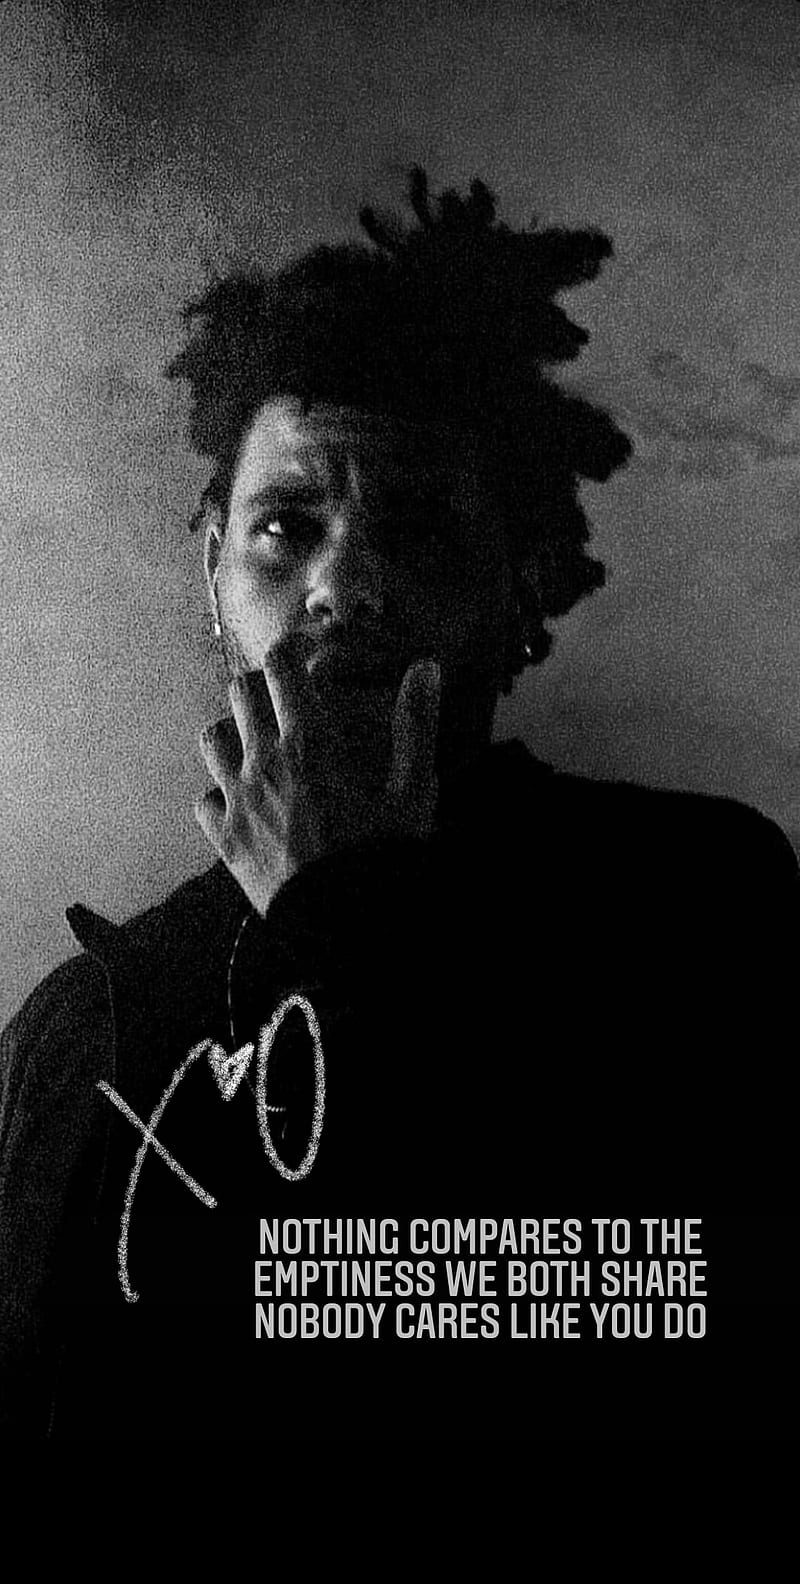 Nothing compares, after hours, bbtm, kissland, mdm, starboy, the weeknd, trilogy, xo, HD phone wallpaper